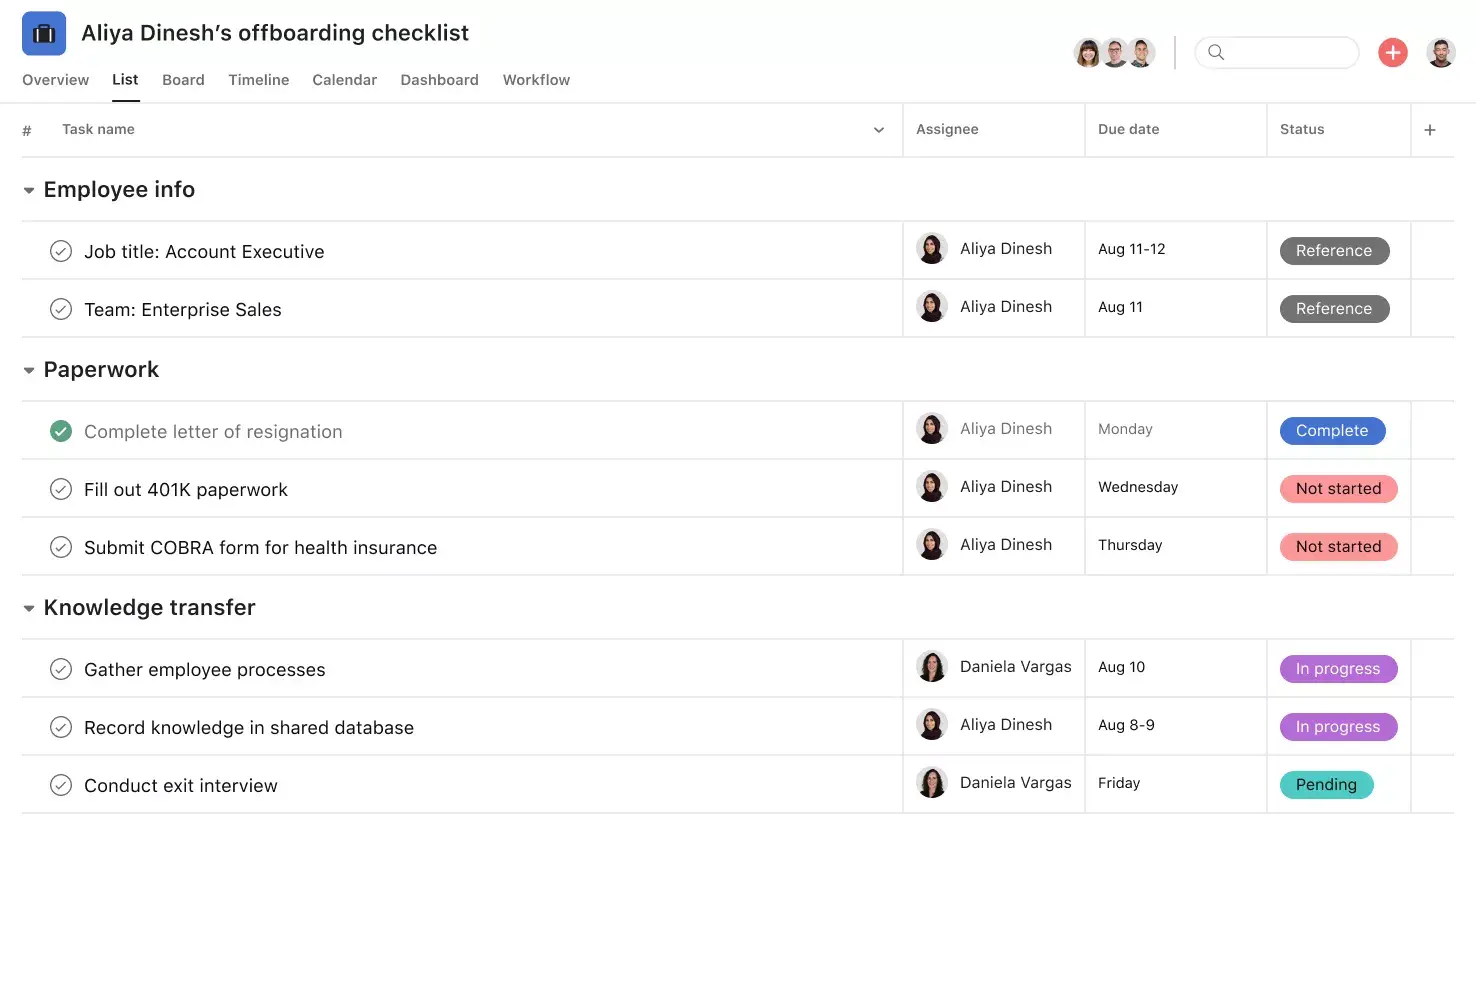 [product ui] Employee offboarding checklist template in Asana, spreadsheet-style project view (List)